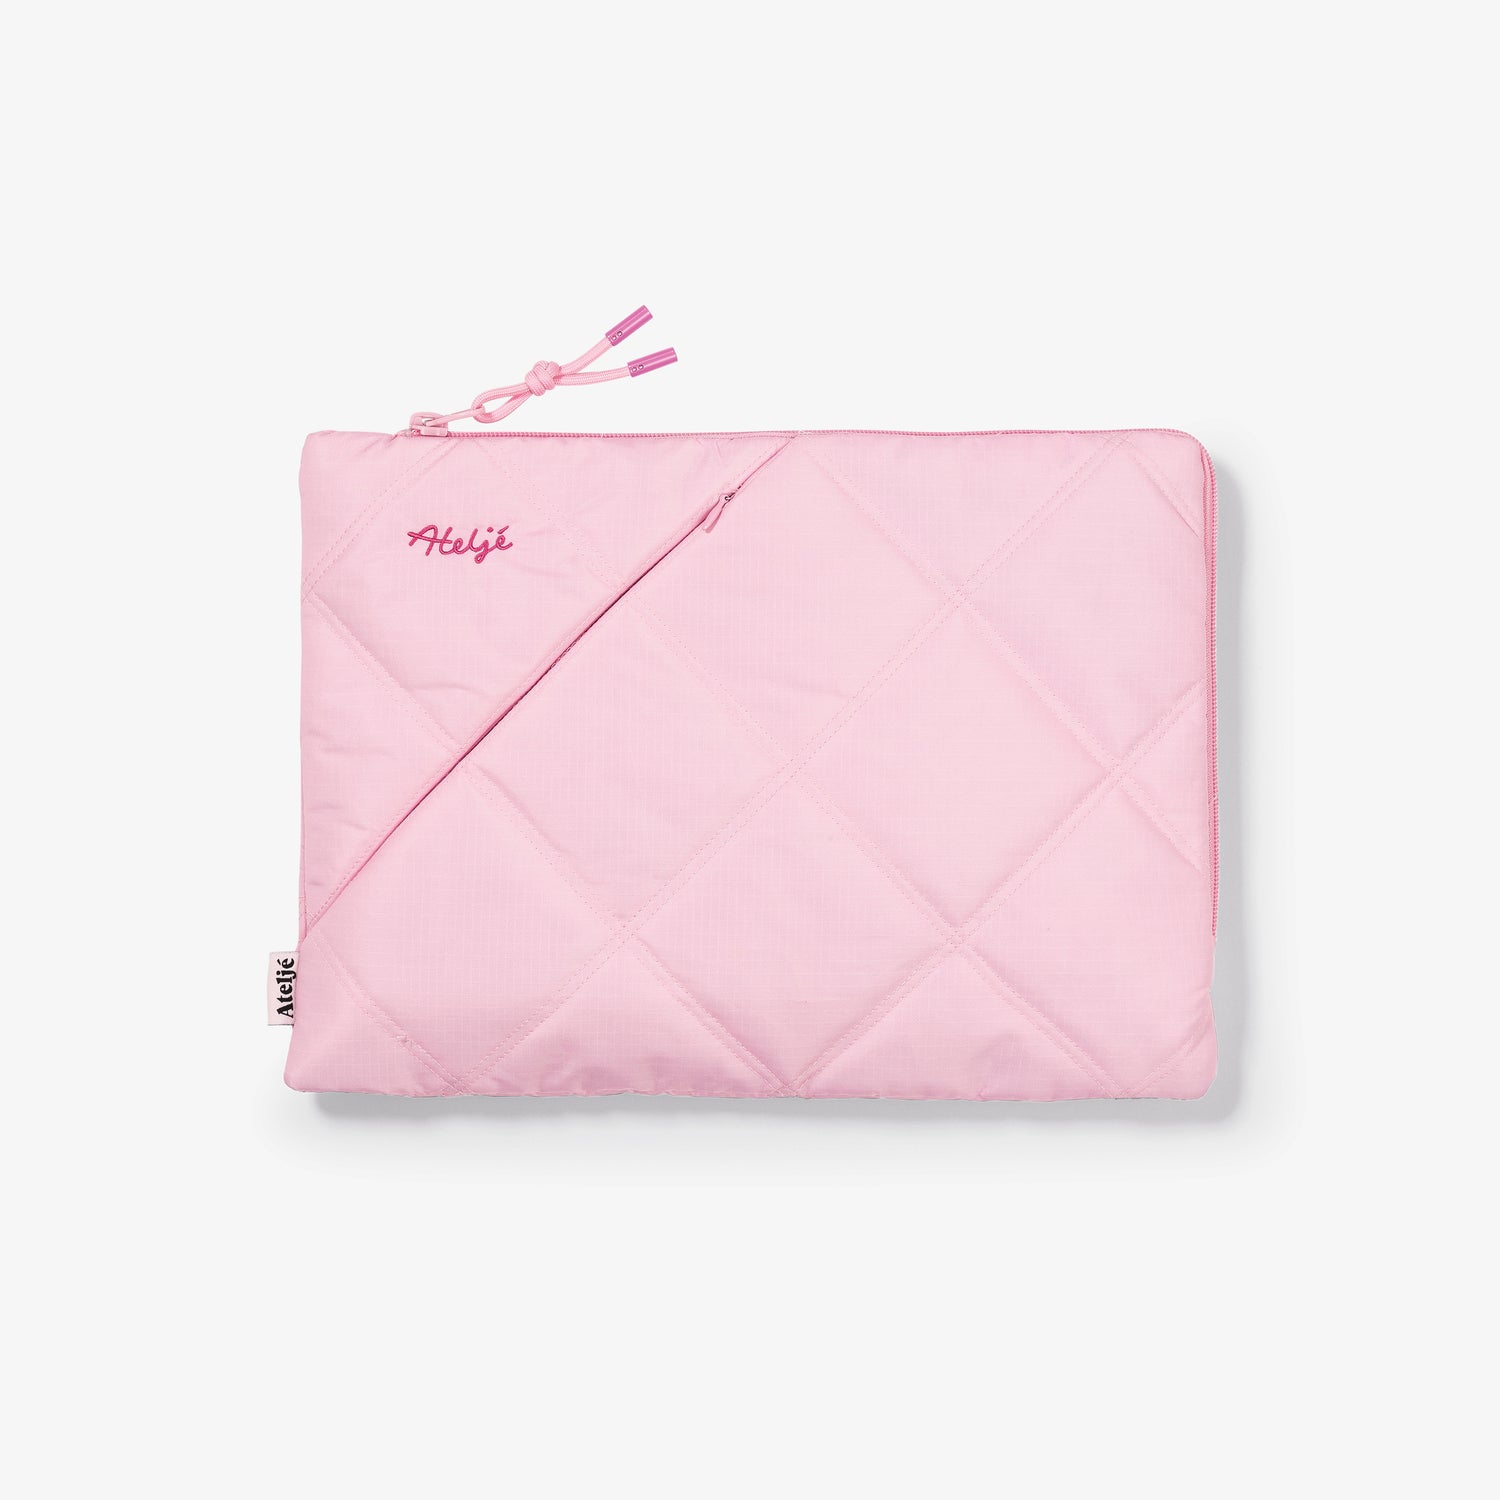 Archive sale - laptop sleeves